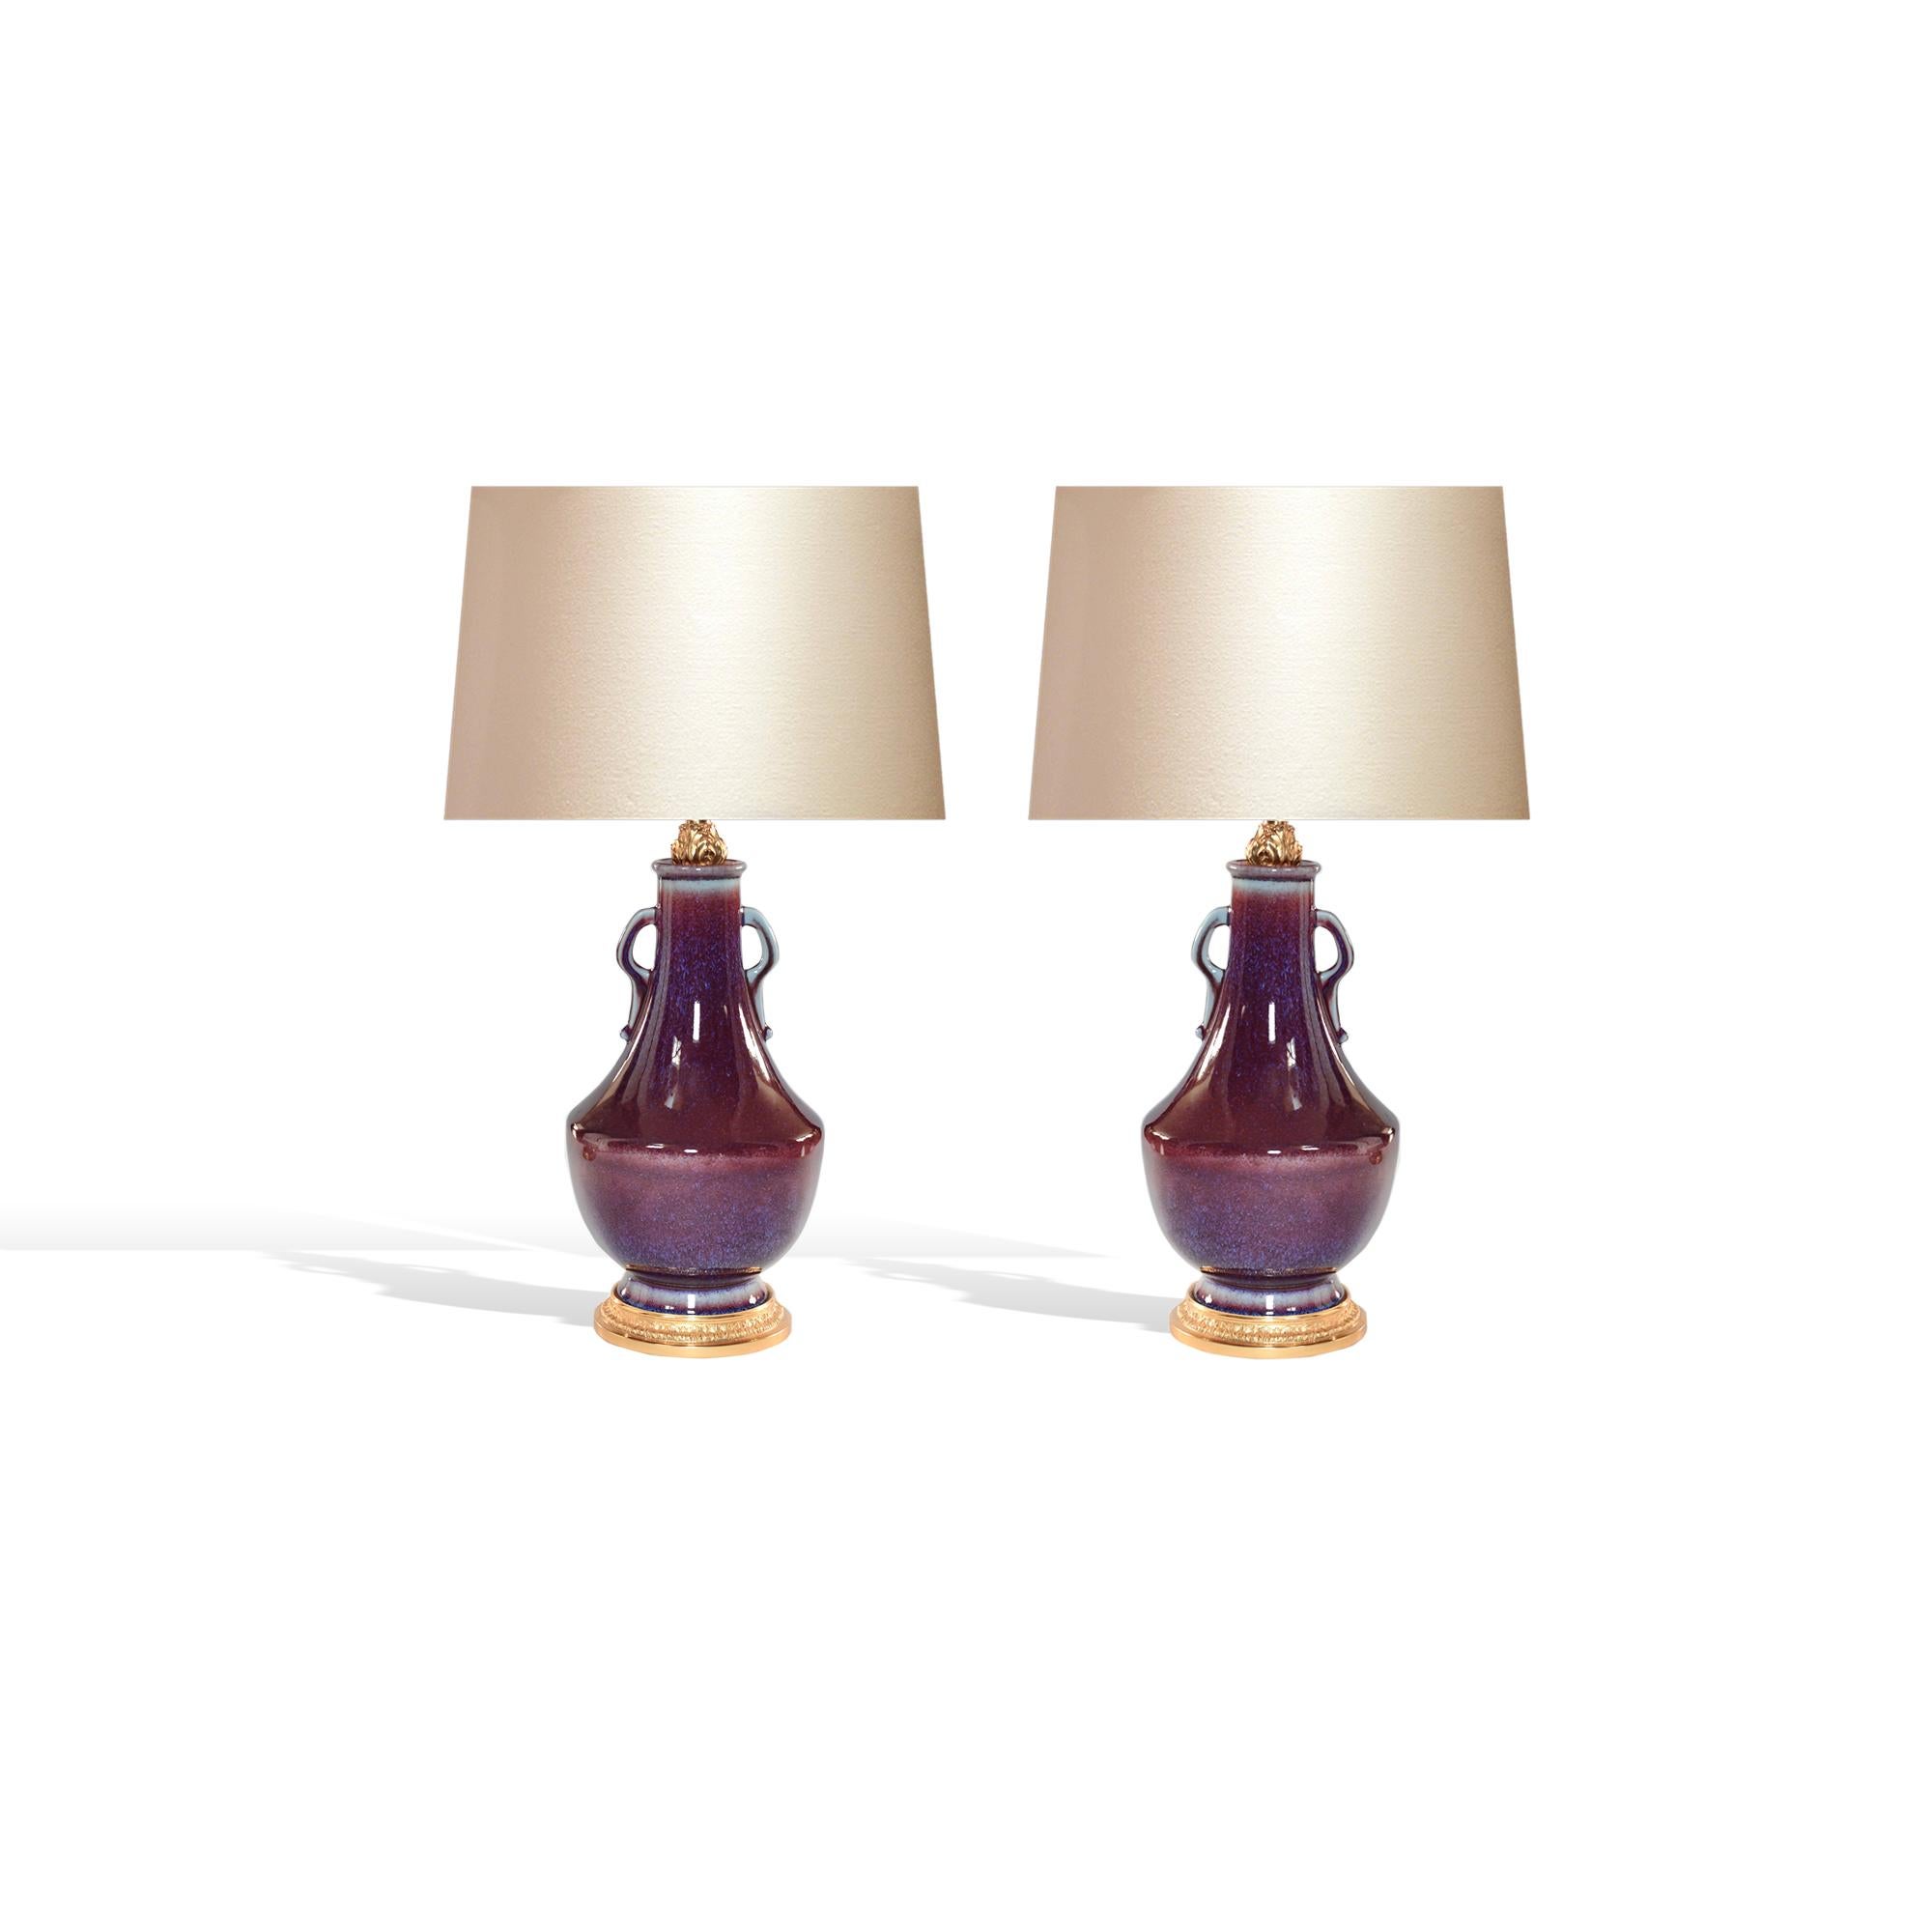 Contemporary Copper-Red-Glazed Porcelain Lamps